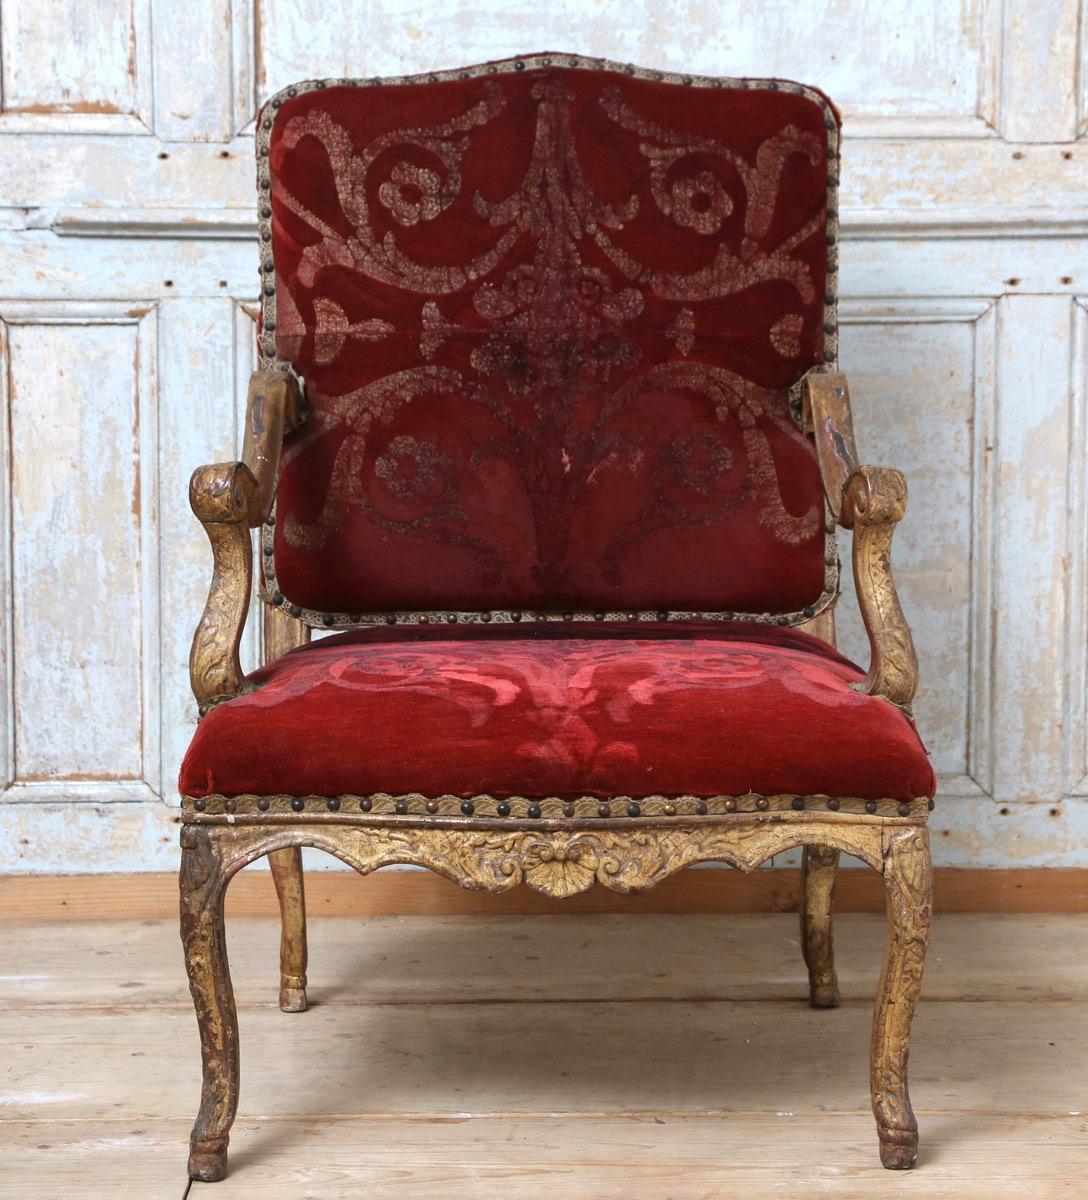 18th Century French Carved Gilded Regence Chair with Original Tapestry Fabric For Sale 3